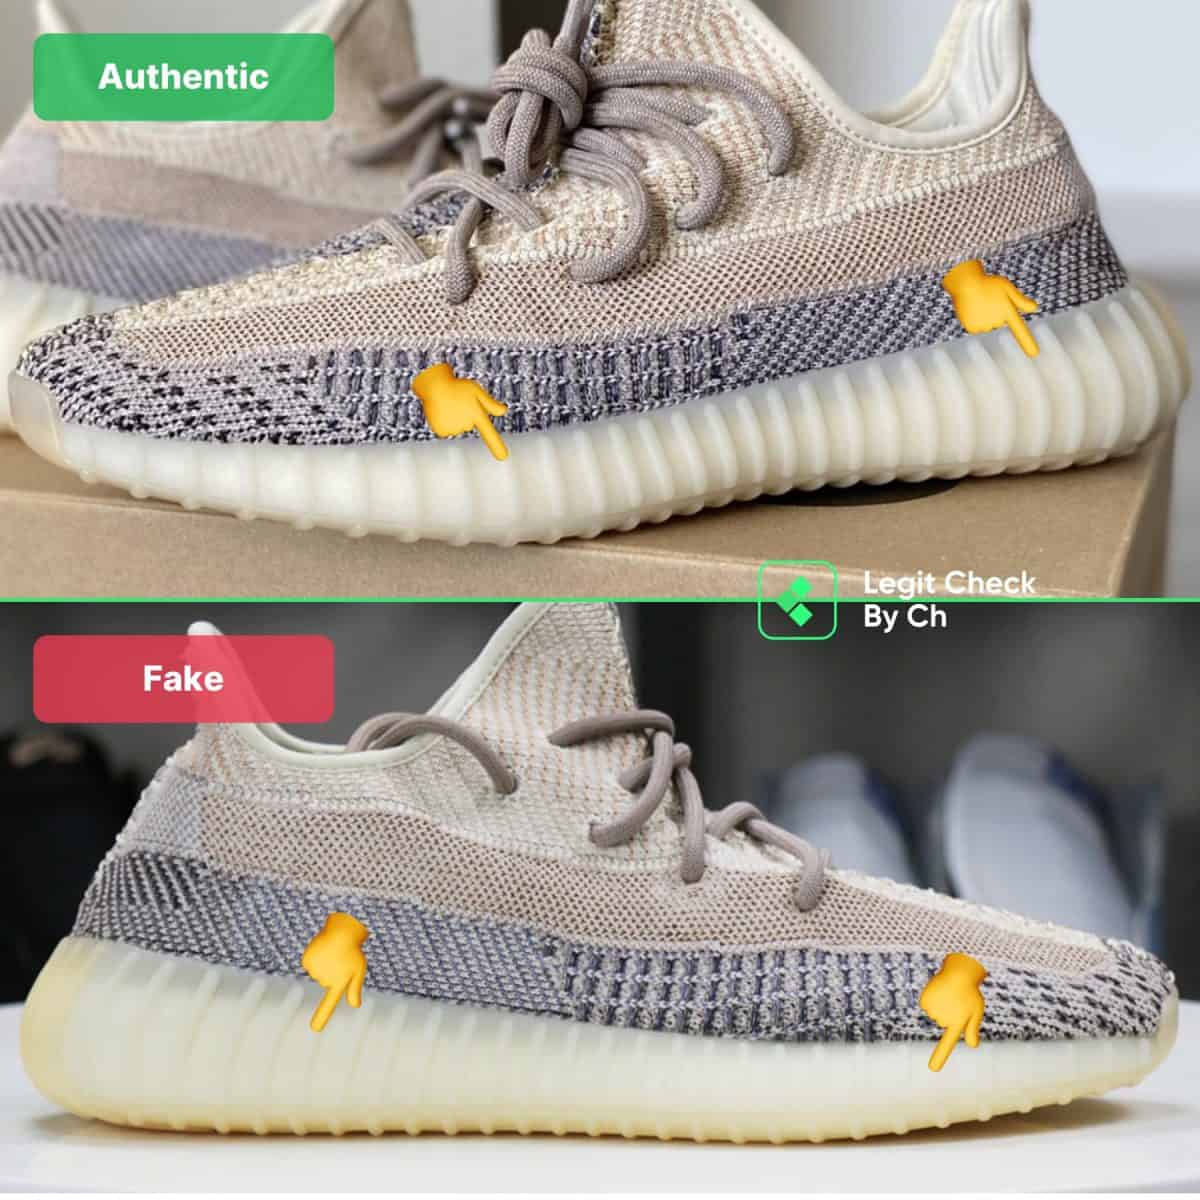 yeezy ash pearl authentication guide